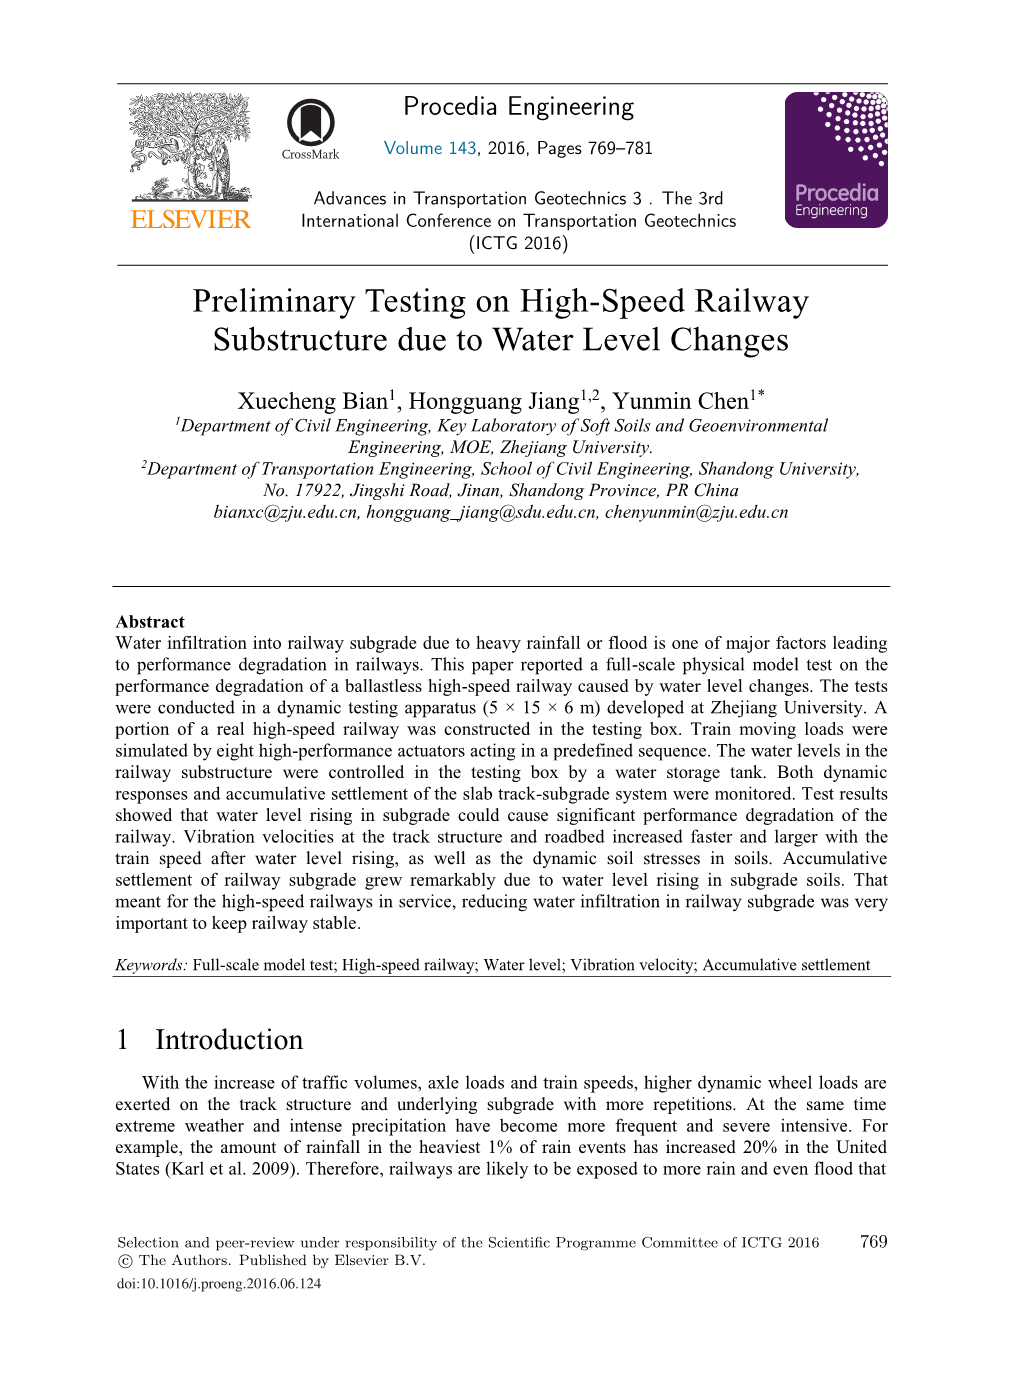 Preliminary Testing on High-Speed Railway Substructure Due to Water Level Changes